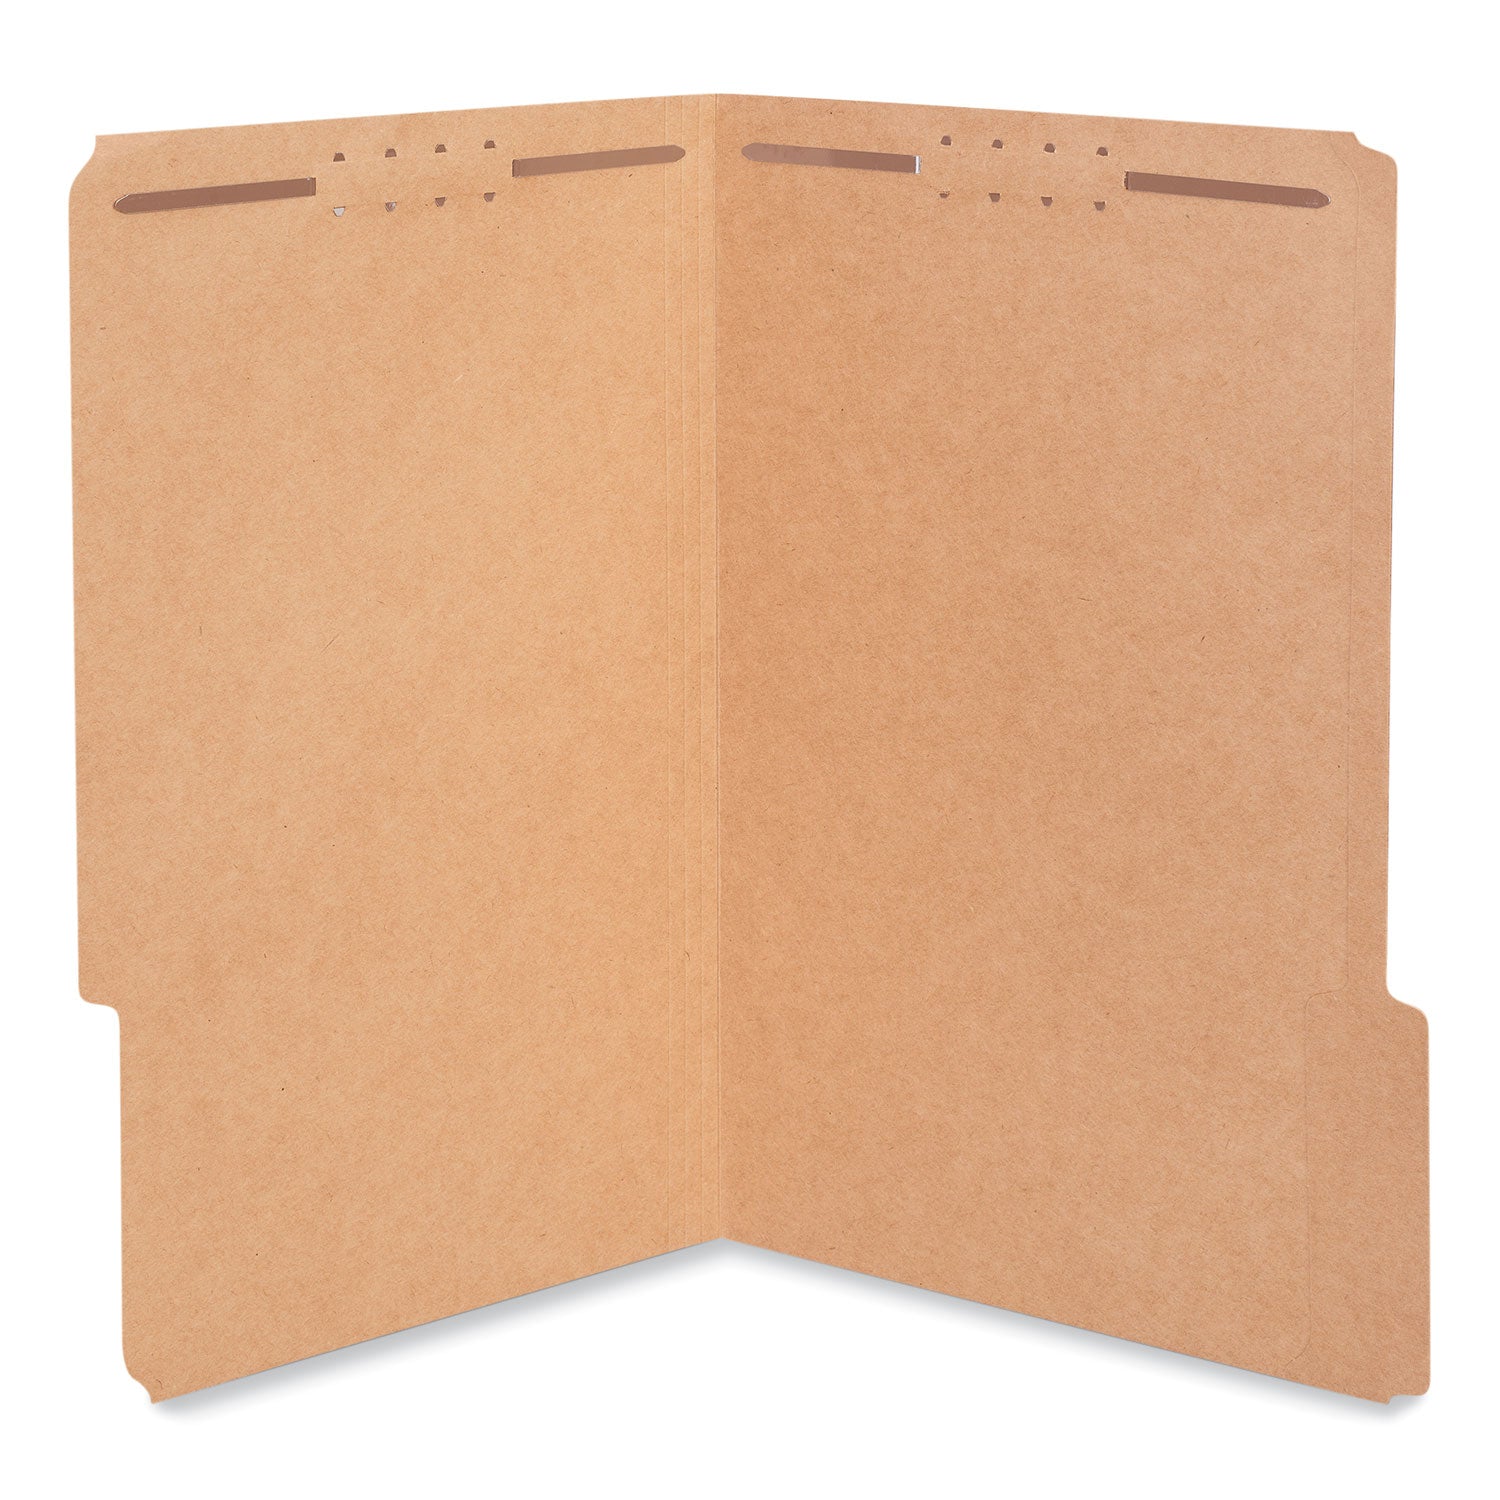 reinforced-top-tab-fastener-folders-075-expansion-2-fasteners-legal-size-brown-kraft-exterior-50-box_unv10412 - 1